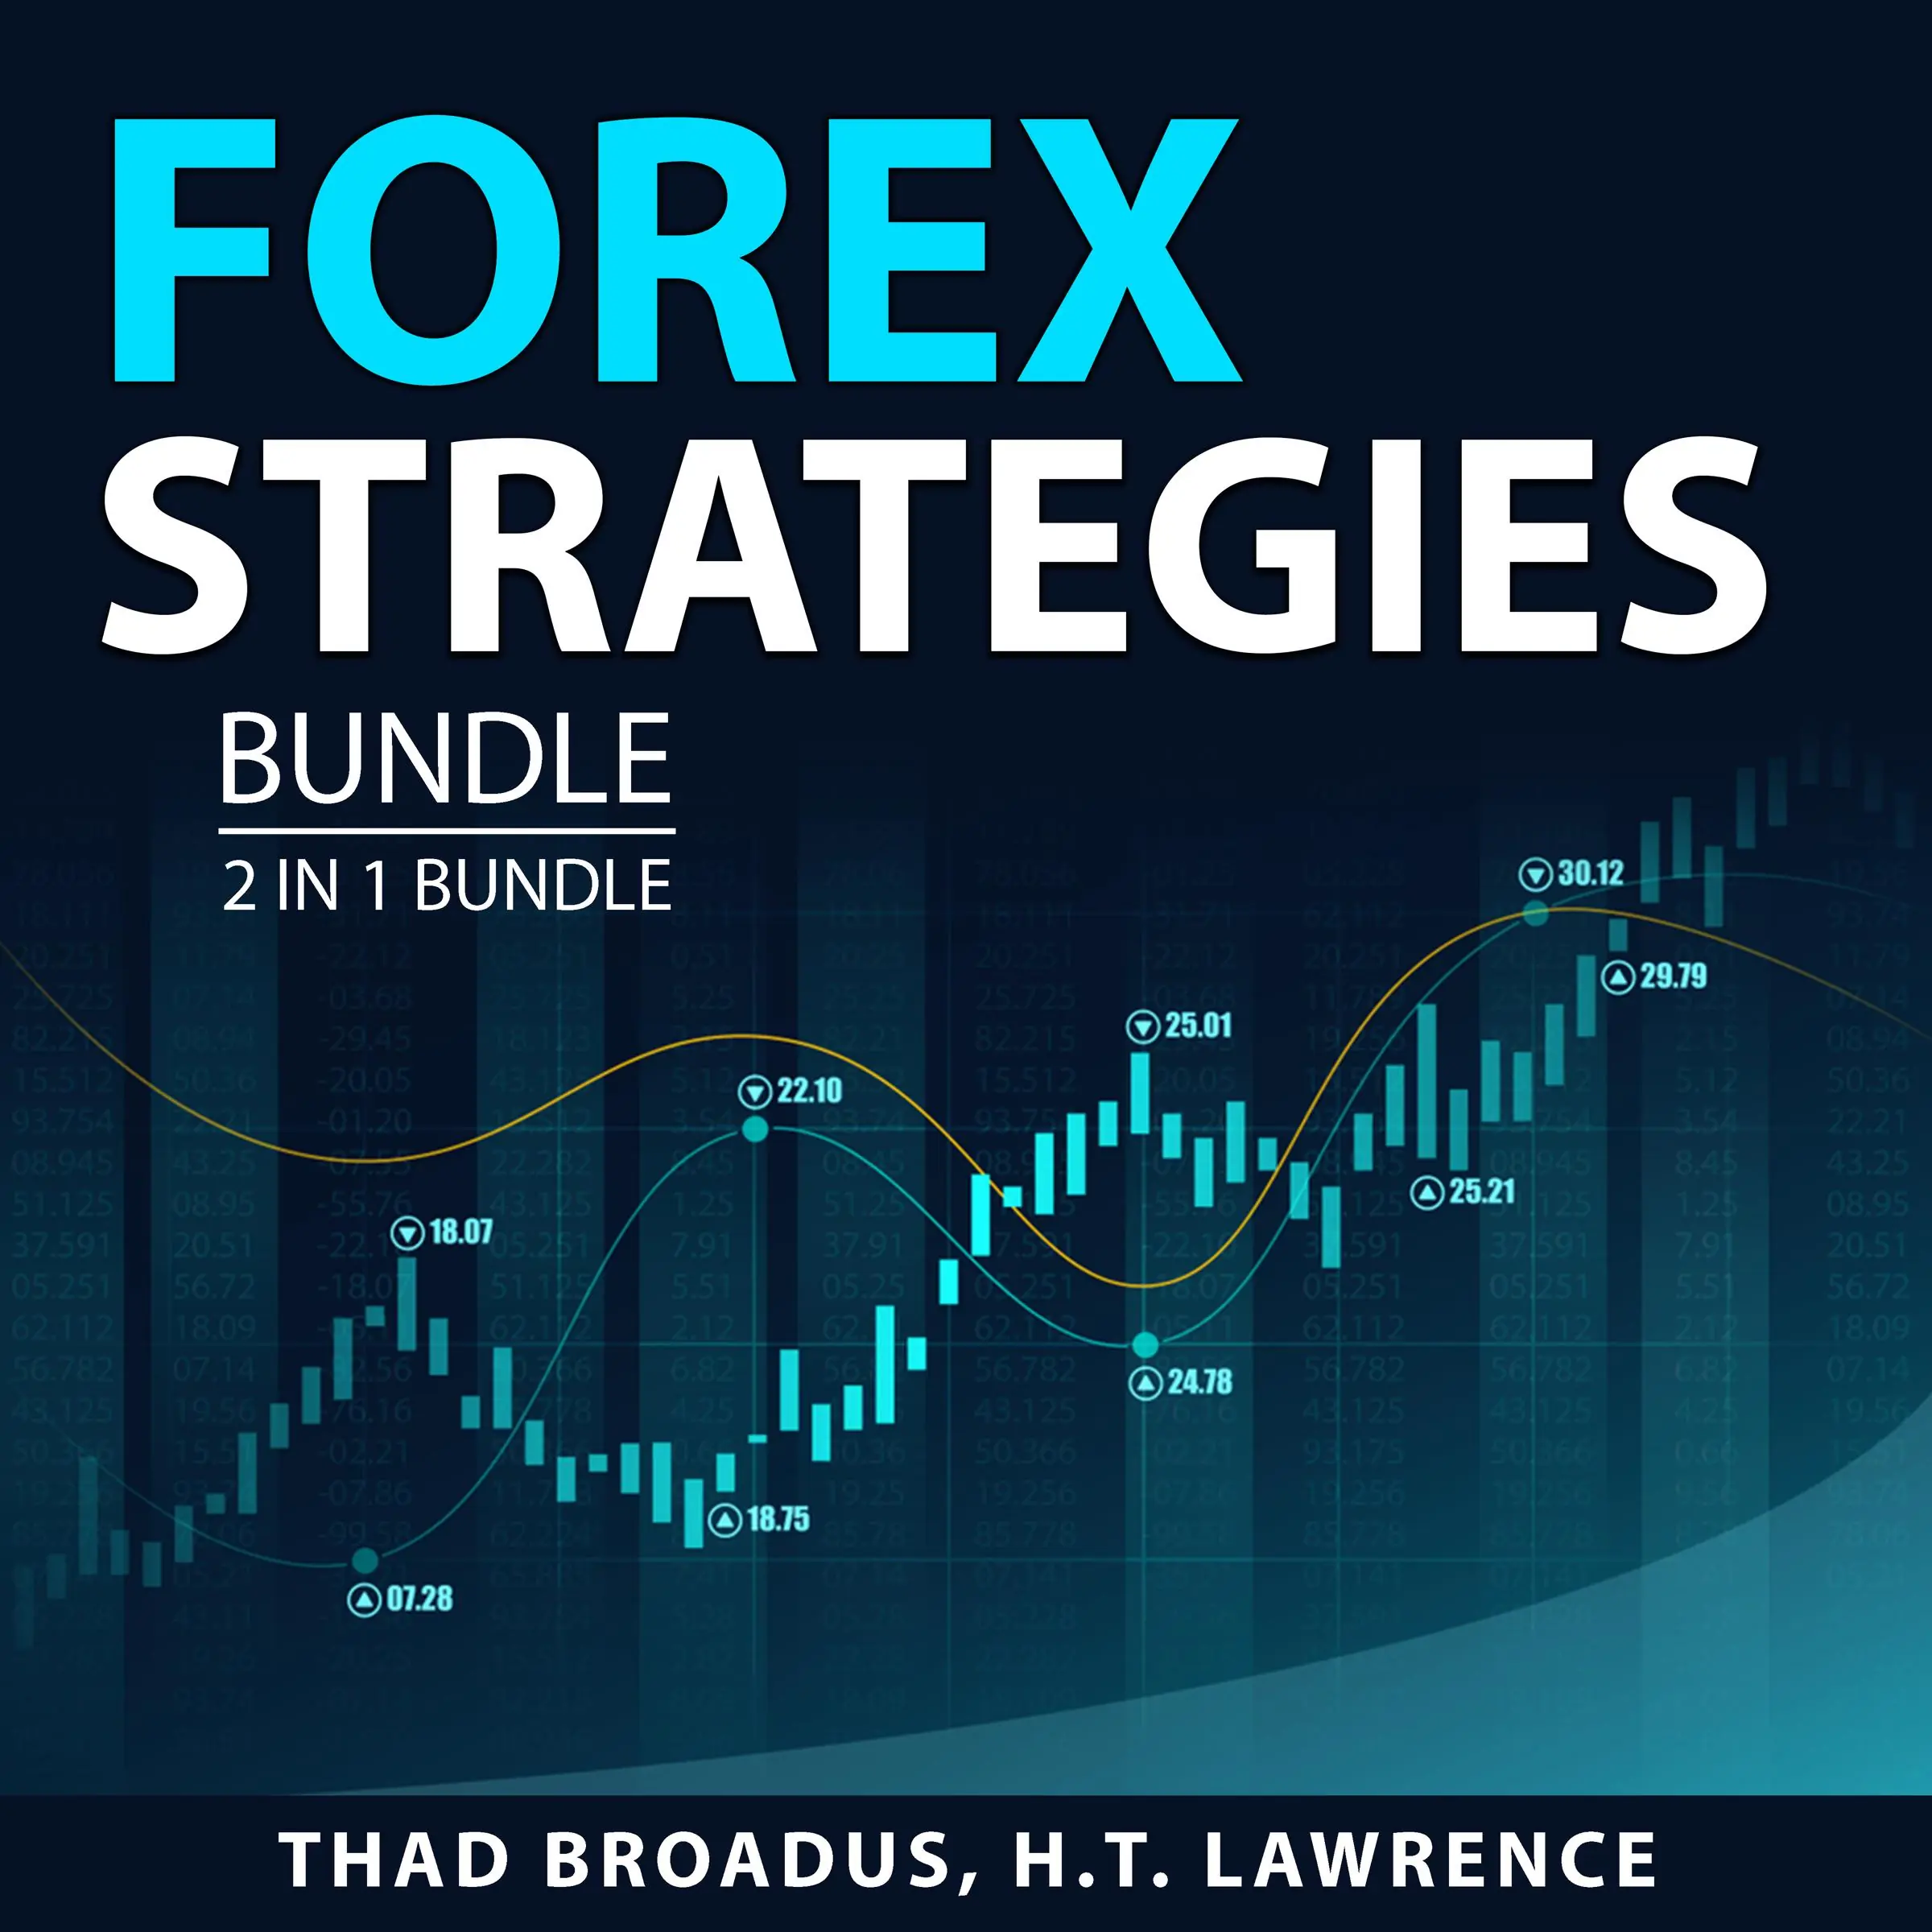 Forex Strategies Bundle, 2 IN 1 Bundle: Global Trading System and Trade the Trader by and H.T. Lawrence Audiobook